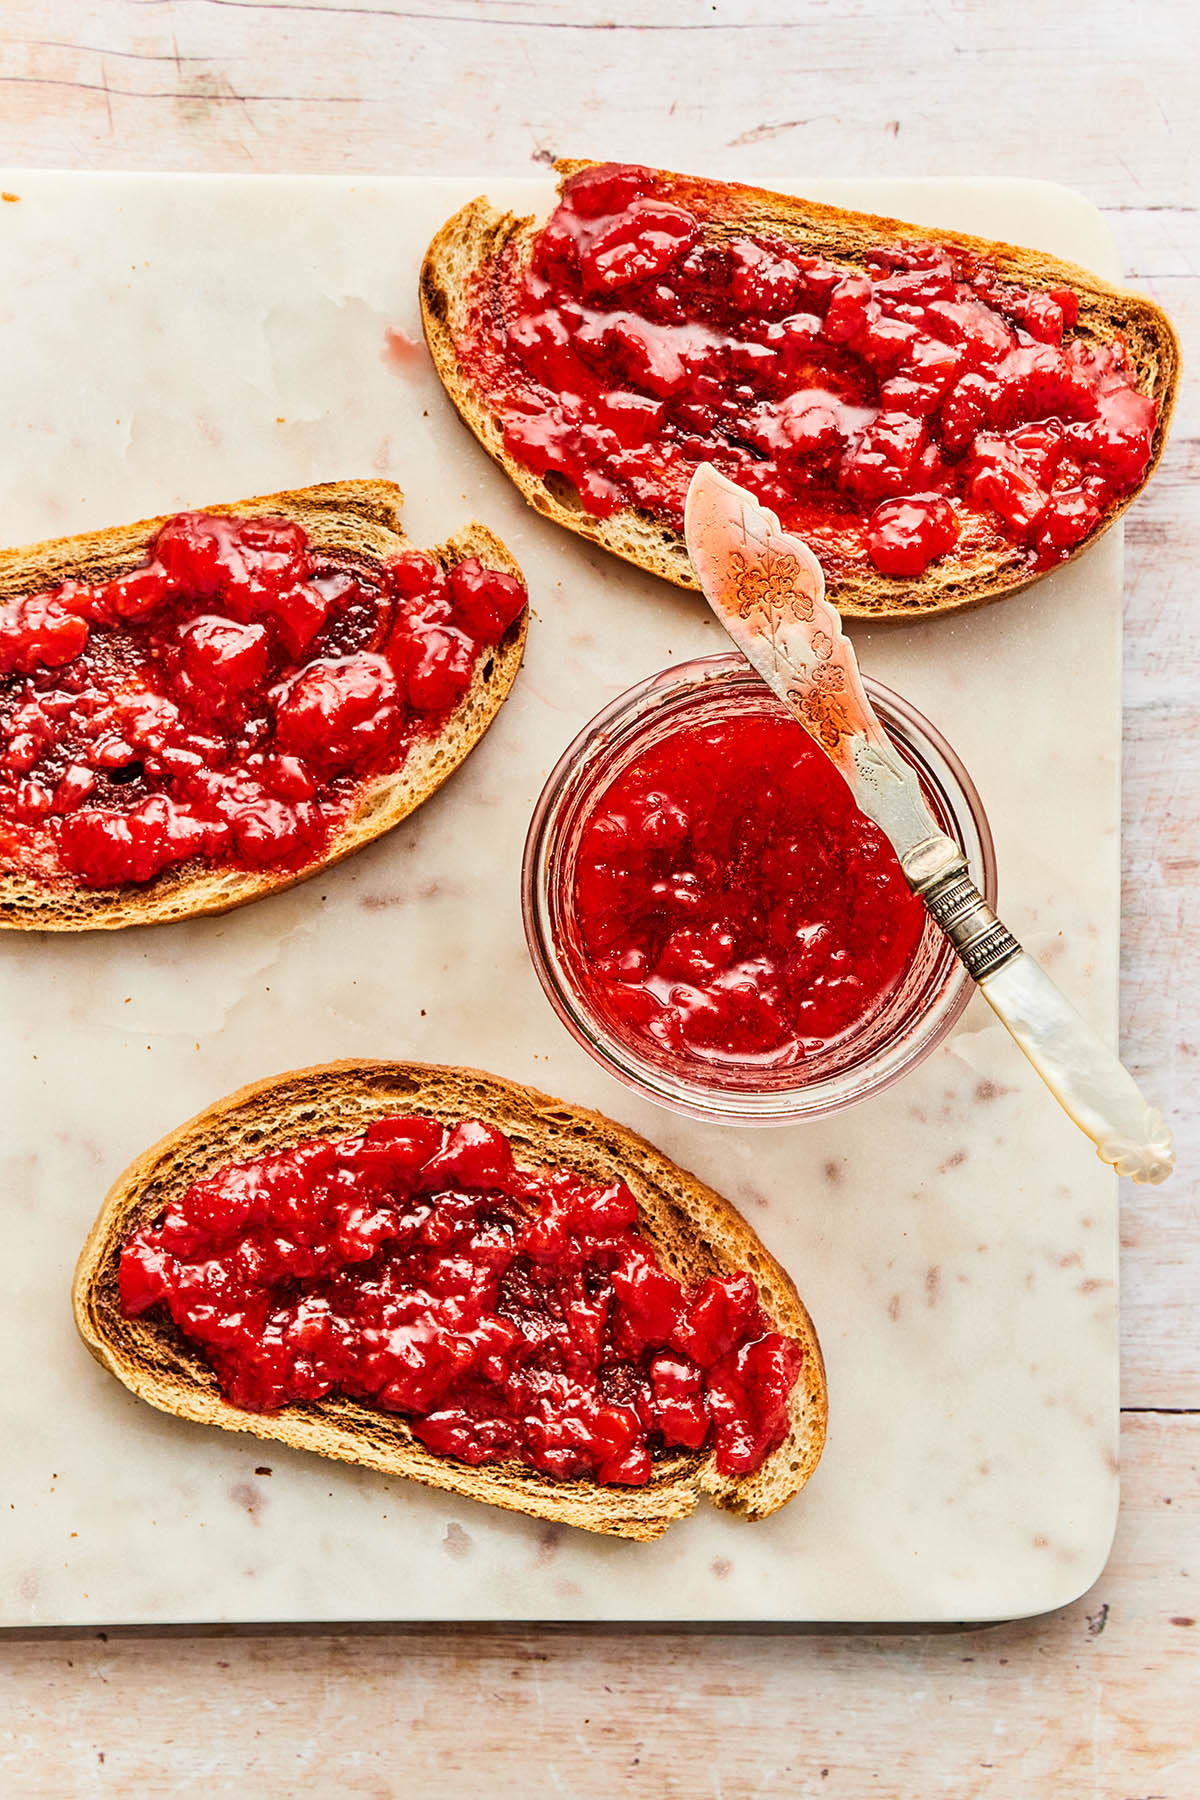 Overhead image of a jar of small-batch strawberry jam alongside slices of toast with jam.